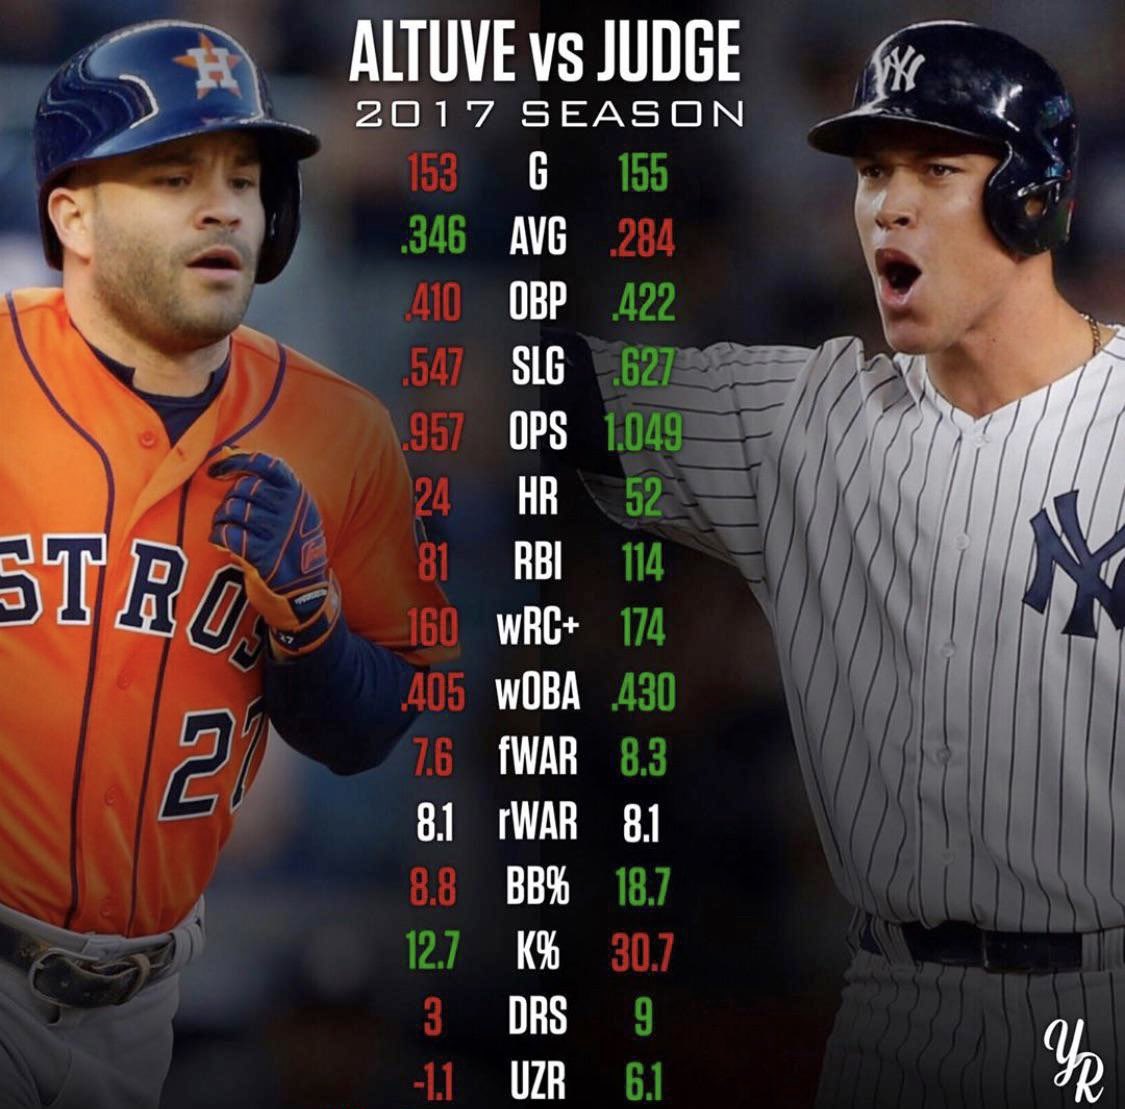 Once again, Aaron Judge was robbed of the 2017 AL MVP Award… A hill I will die on